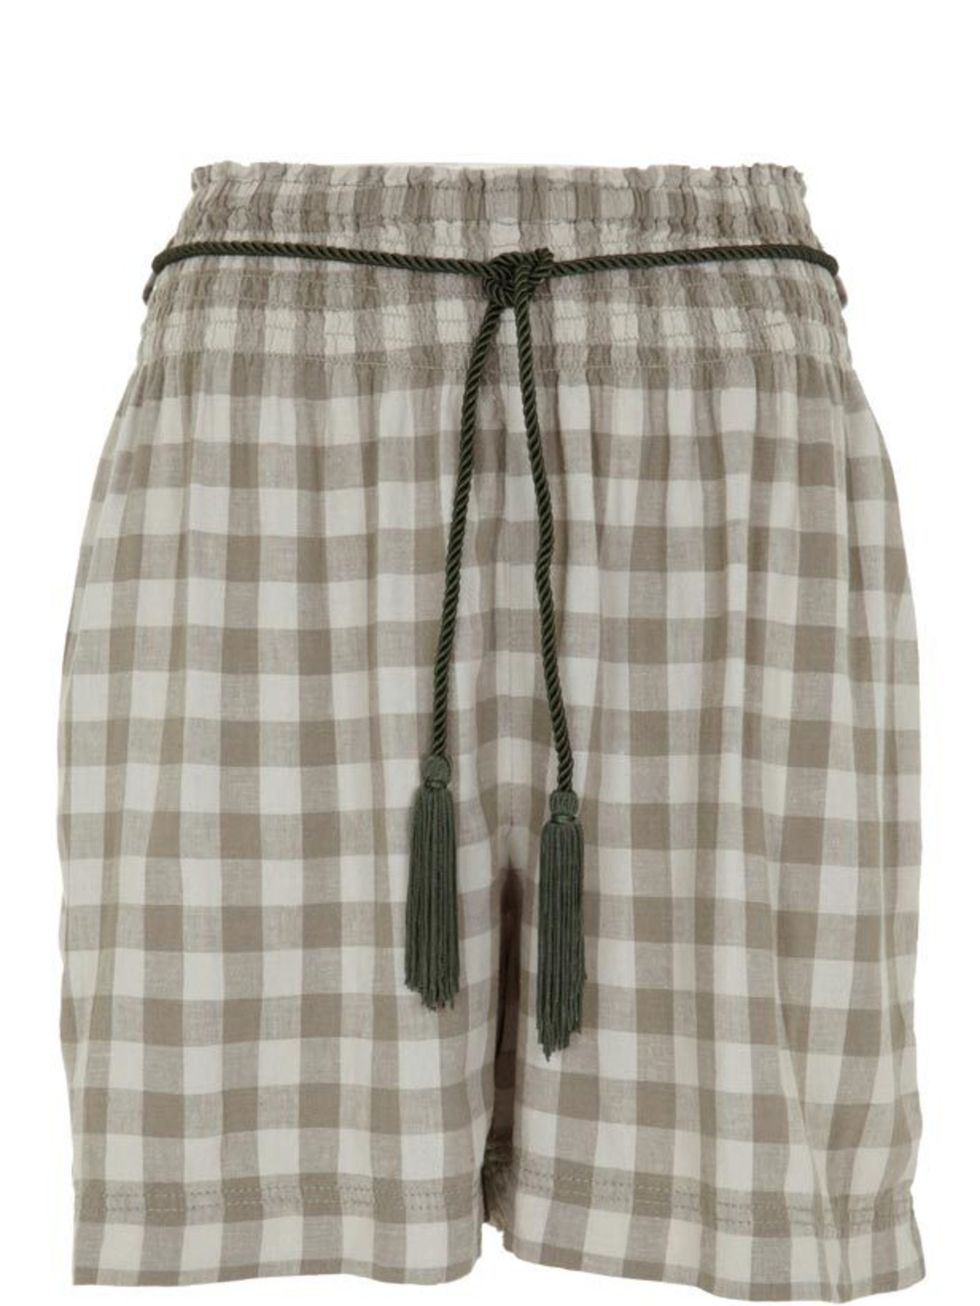 <p>Gingham shorts, £24.99, by <a href="http://xml.riverisland.com/flash/content.php">River Island </a></p>